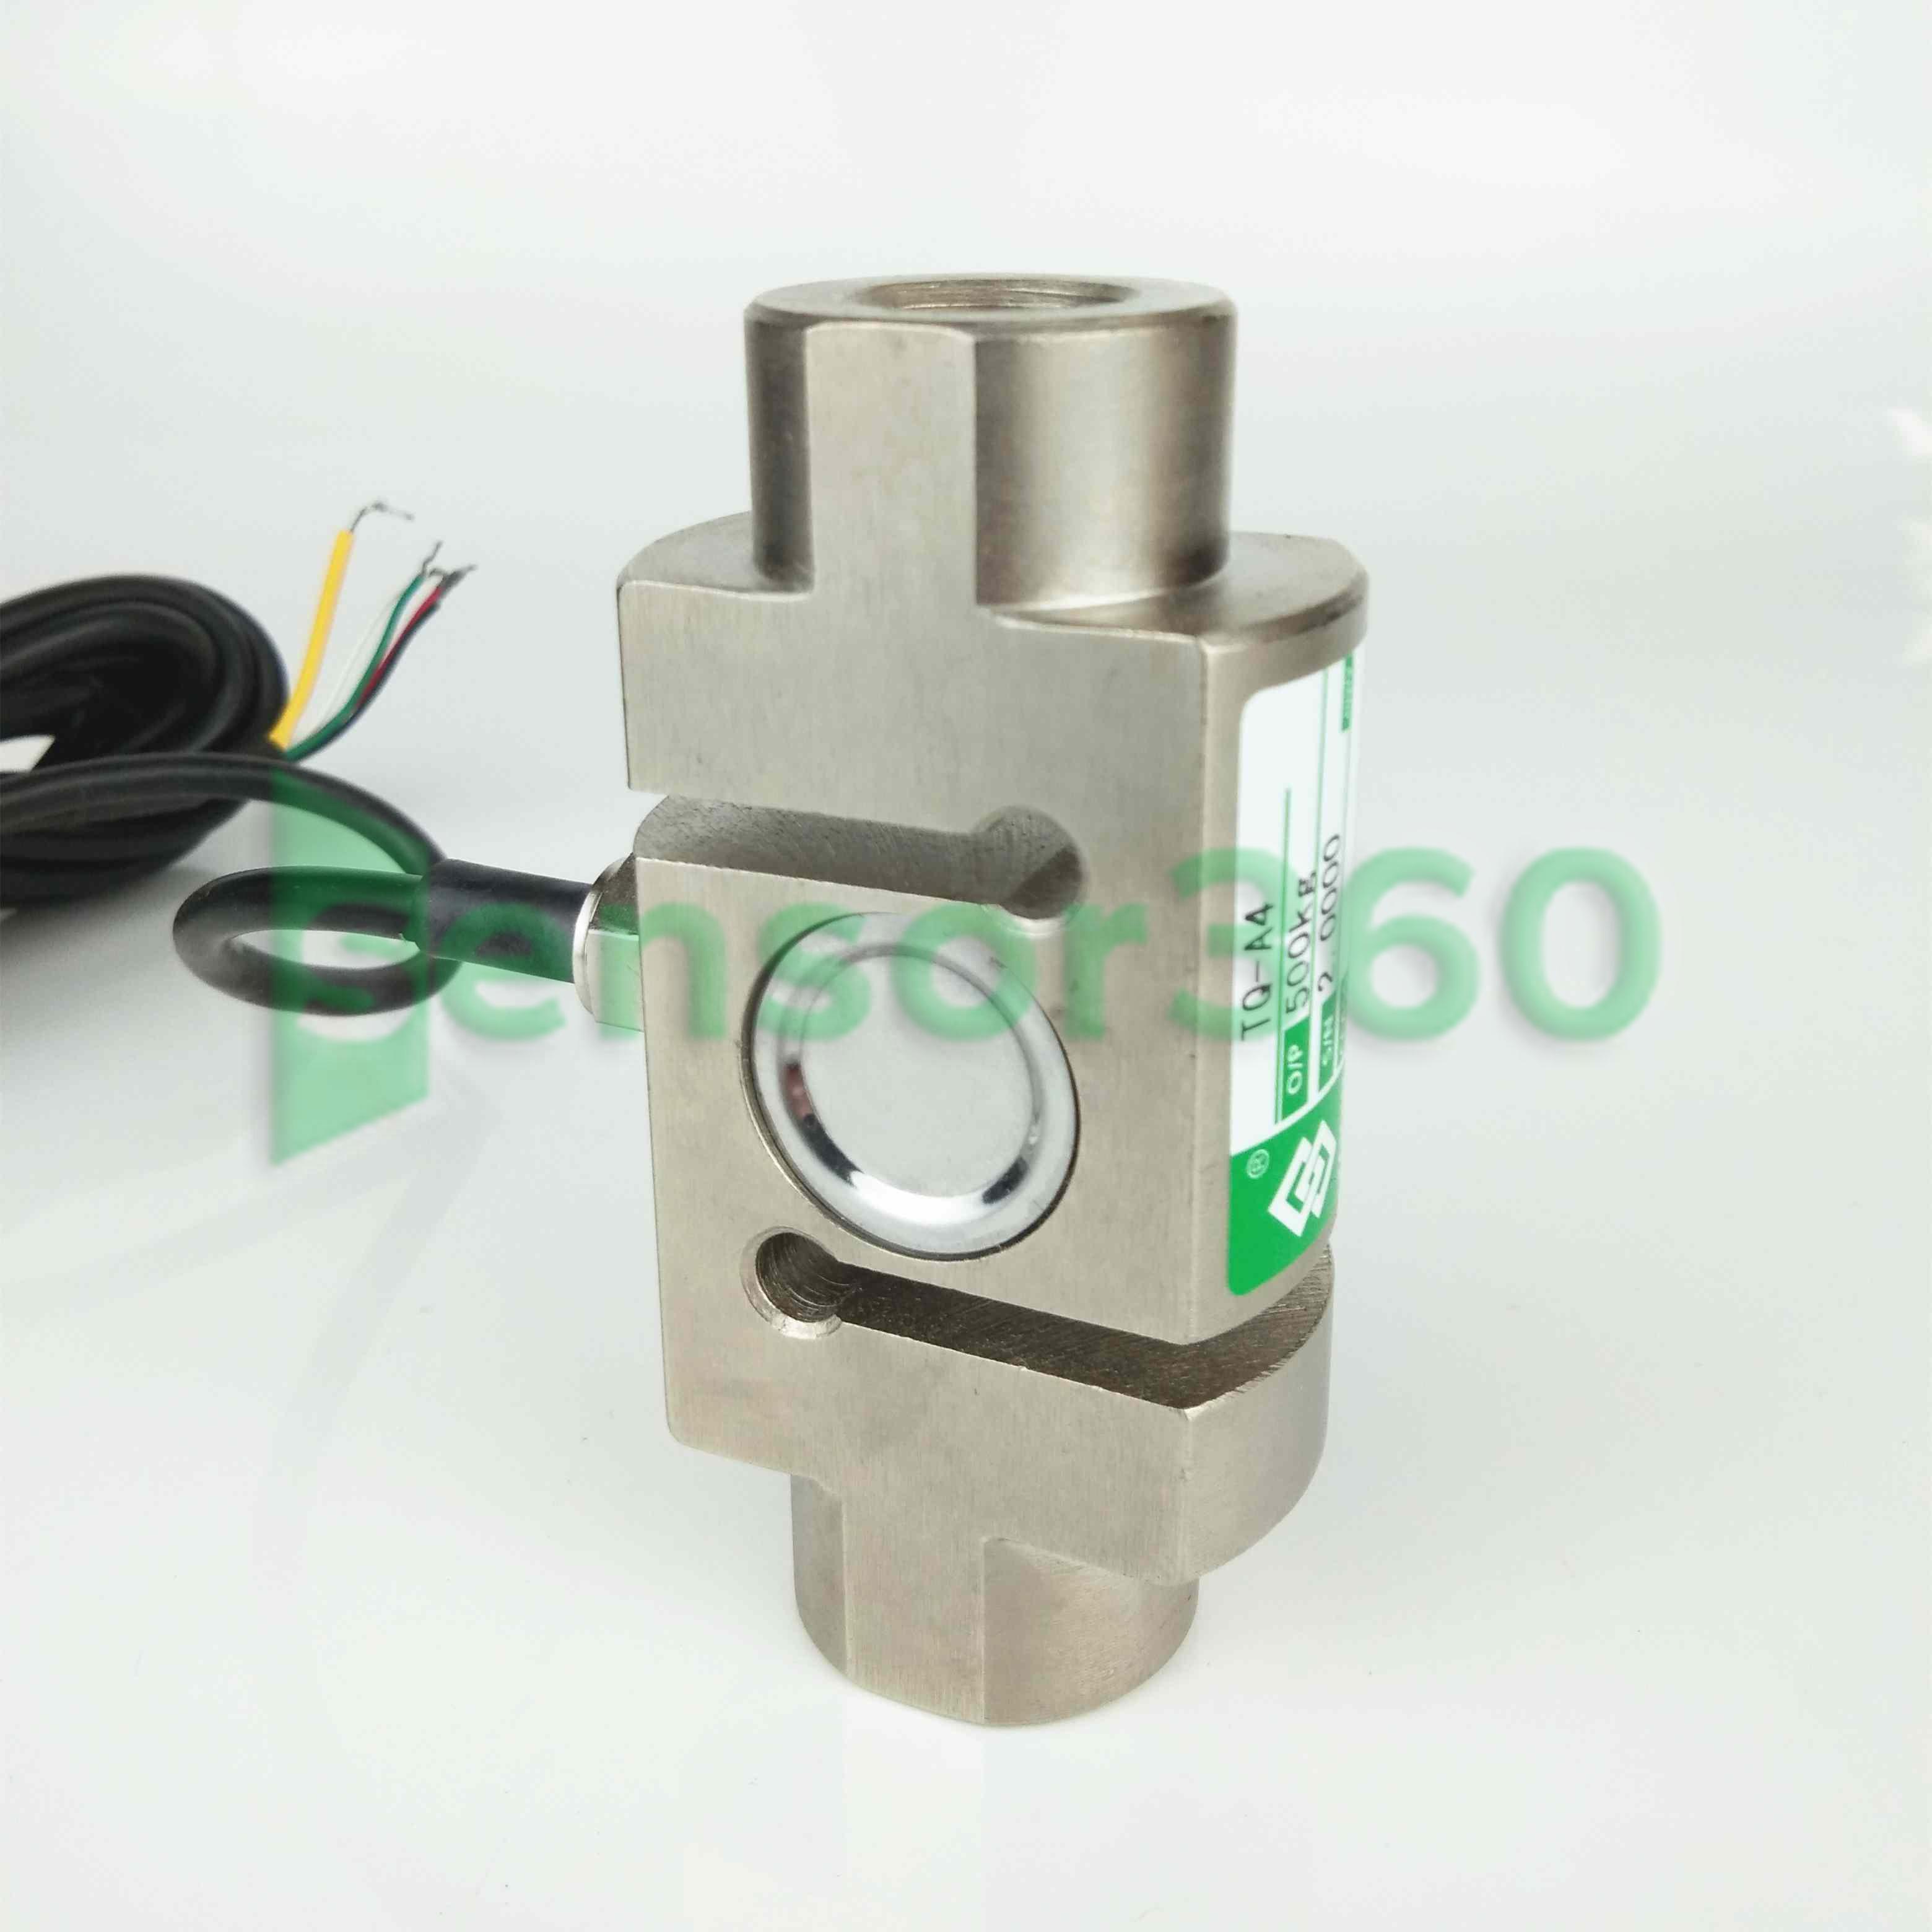 TQ-A4-200kN column type S-type tension and compression load cell